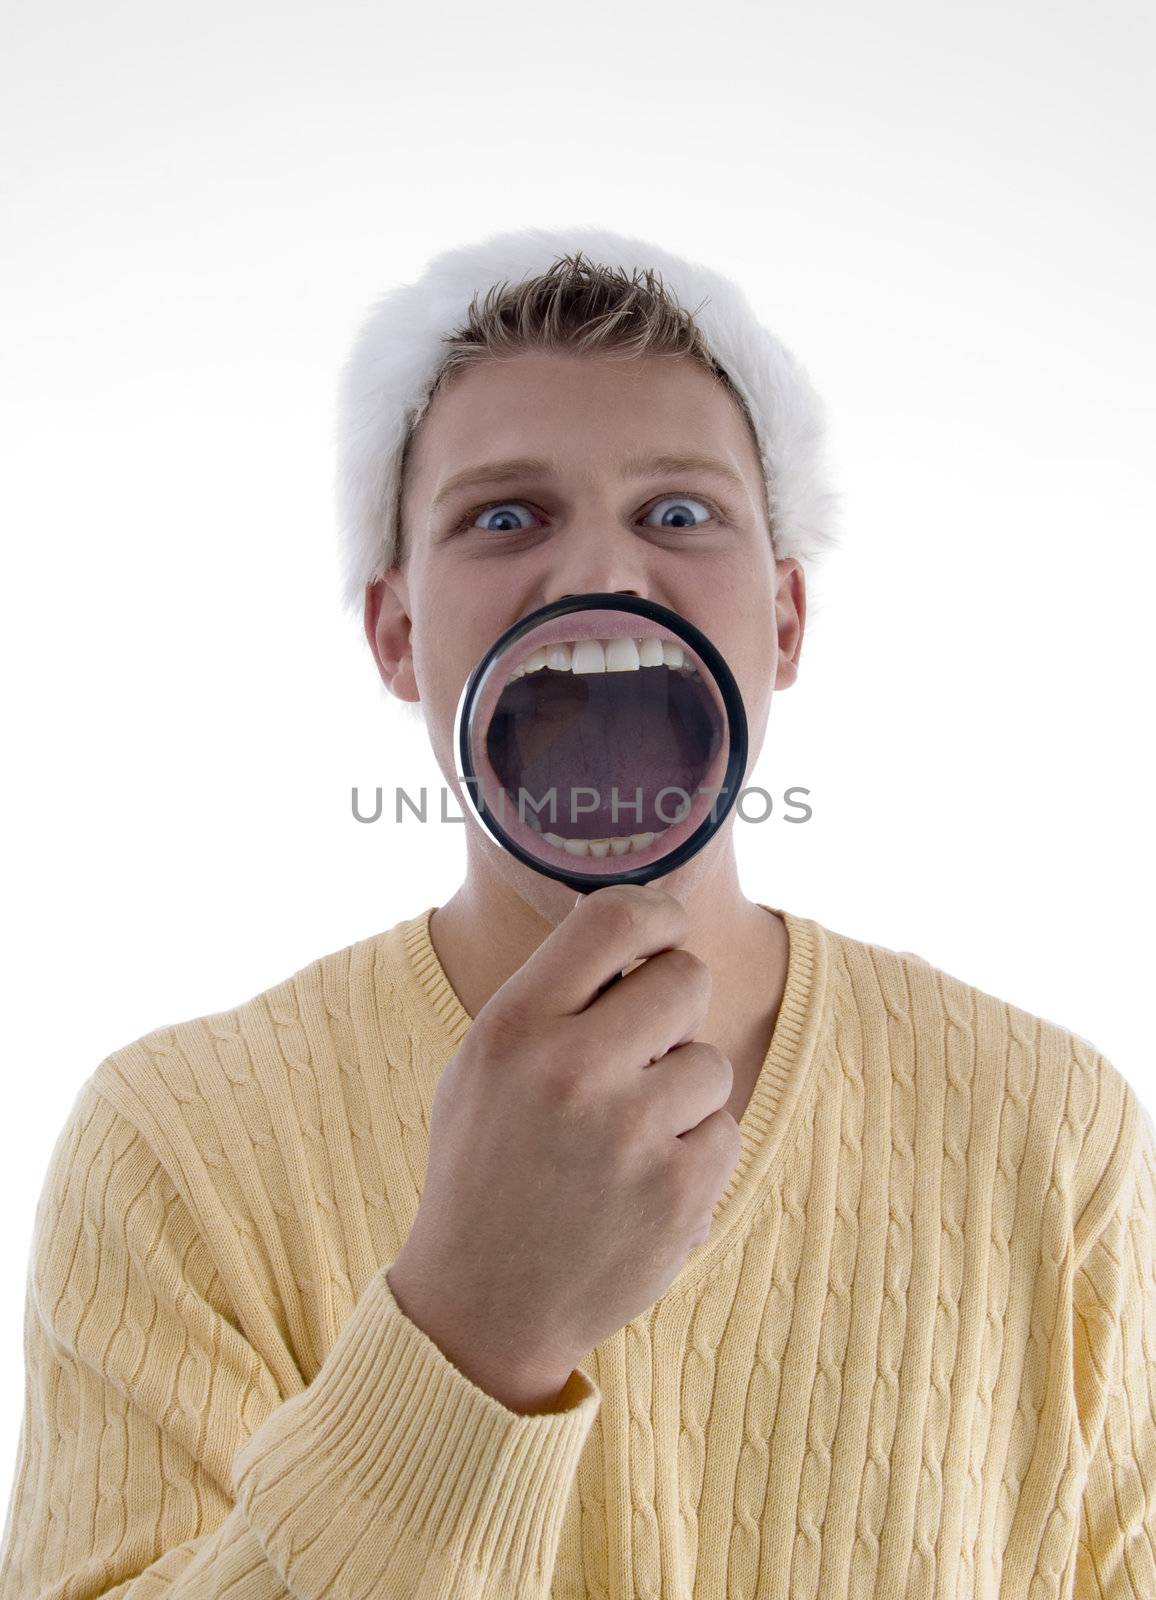 man weaing santa hat and showing teeth through lens on an isolated background